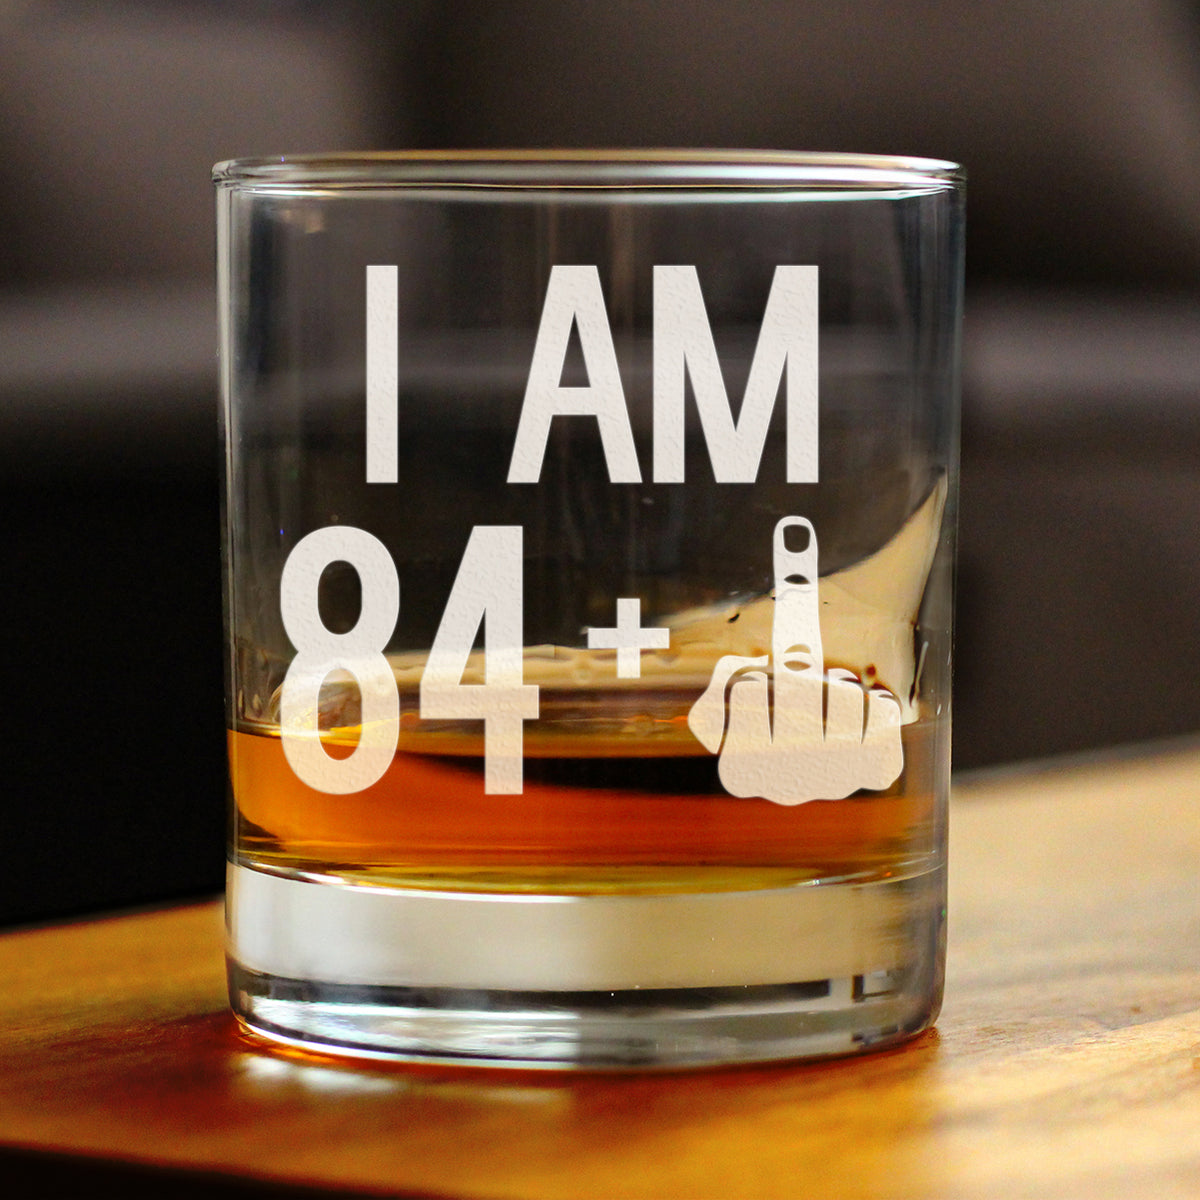 84 + 1 Middle Finger - Funny 85th Birthday Whiskey Rocks Glass Gifts for Men &amp; Women Turning 85 - Fun Whisky Drinking Tumbler